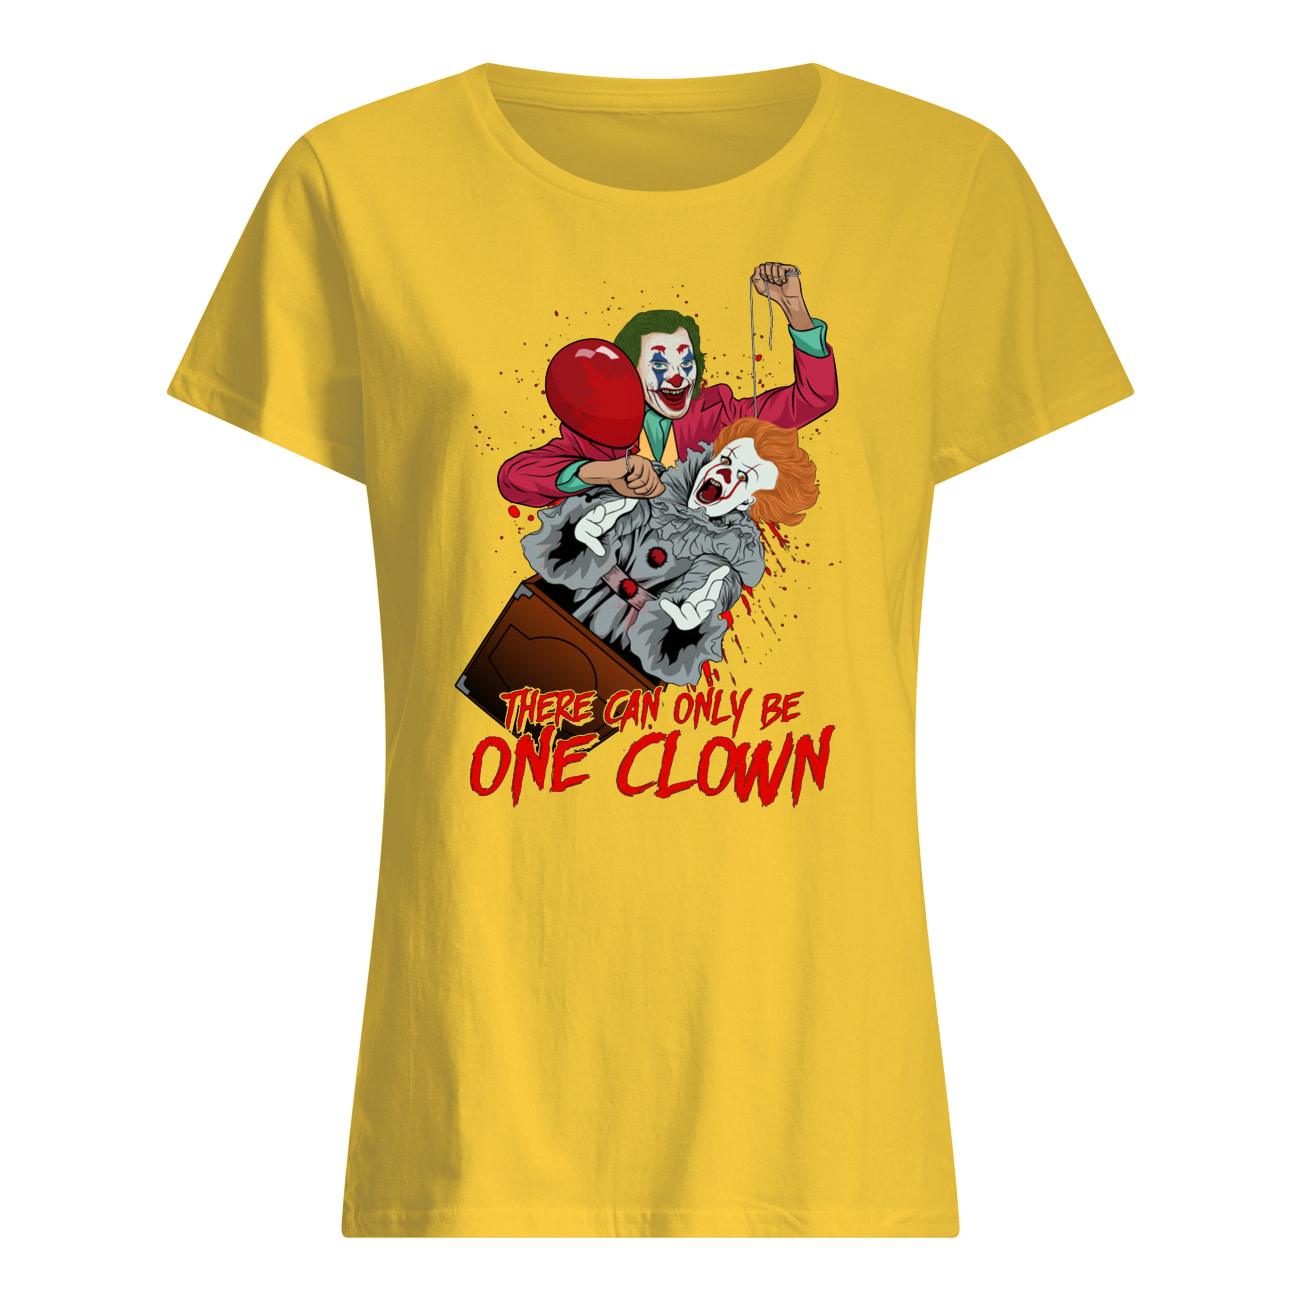 There can only be one clown pennywise and joker womens shirt